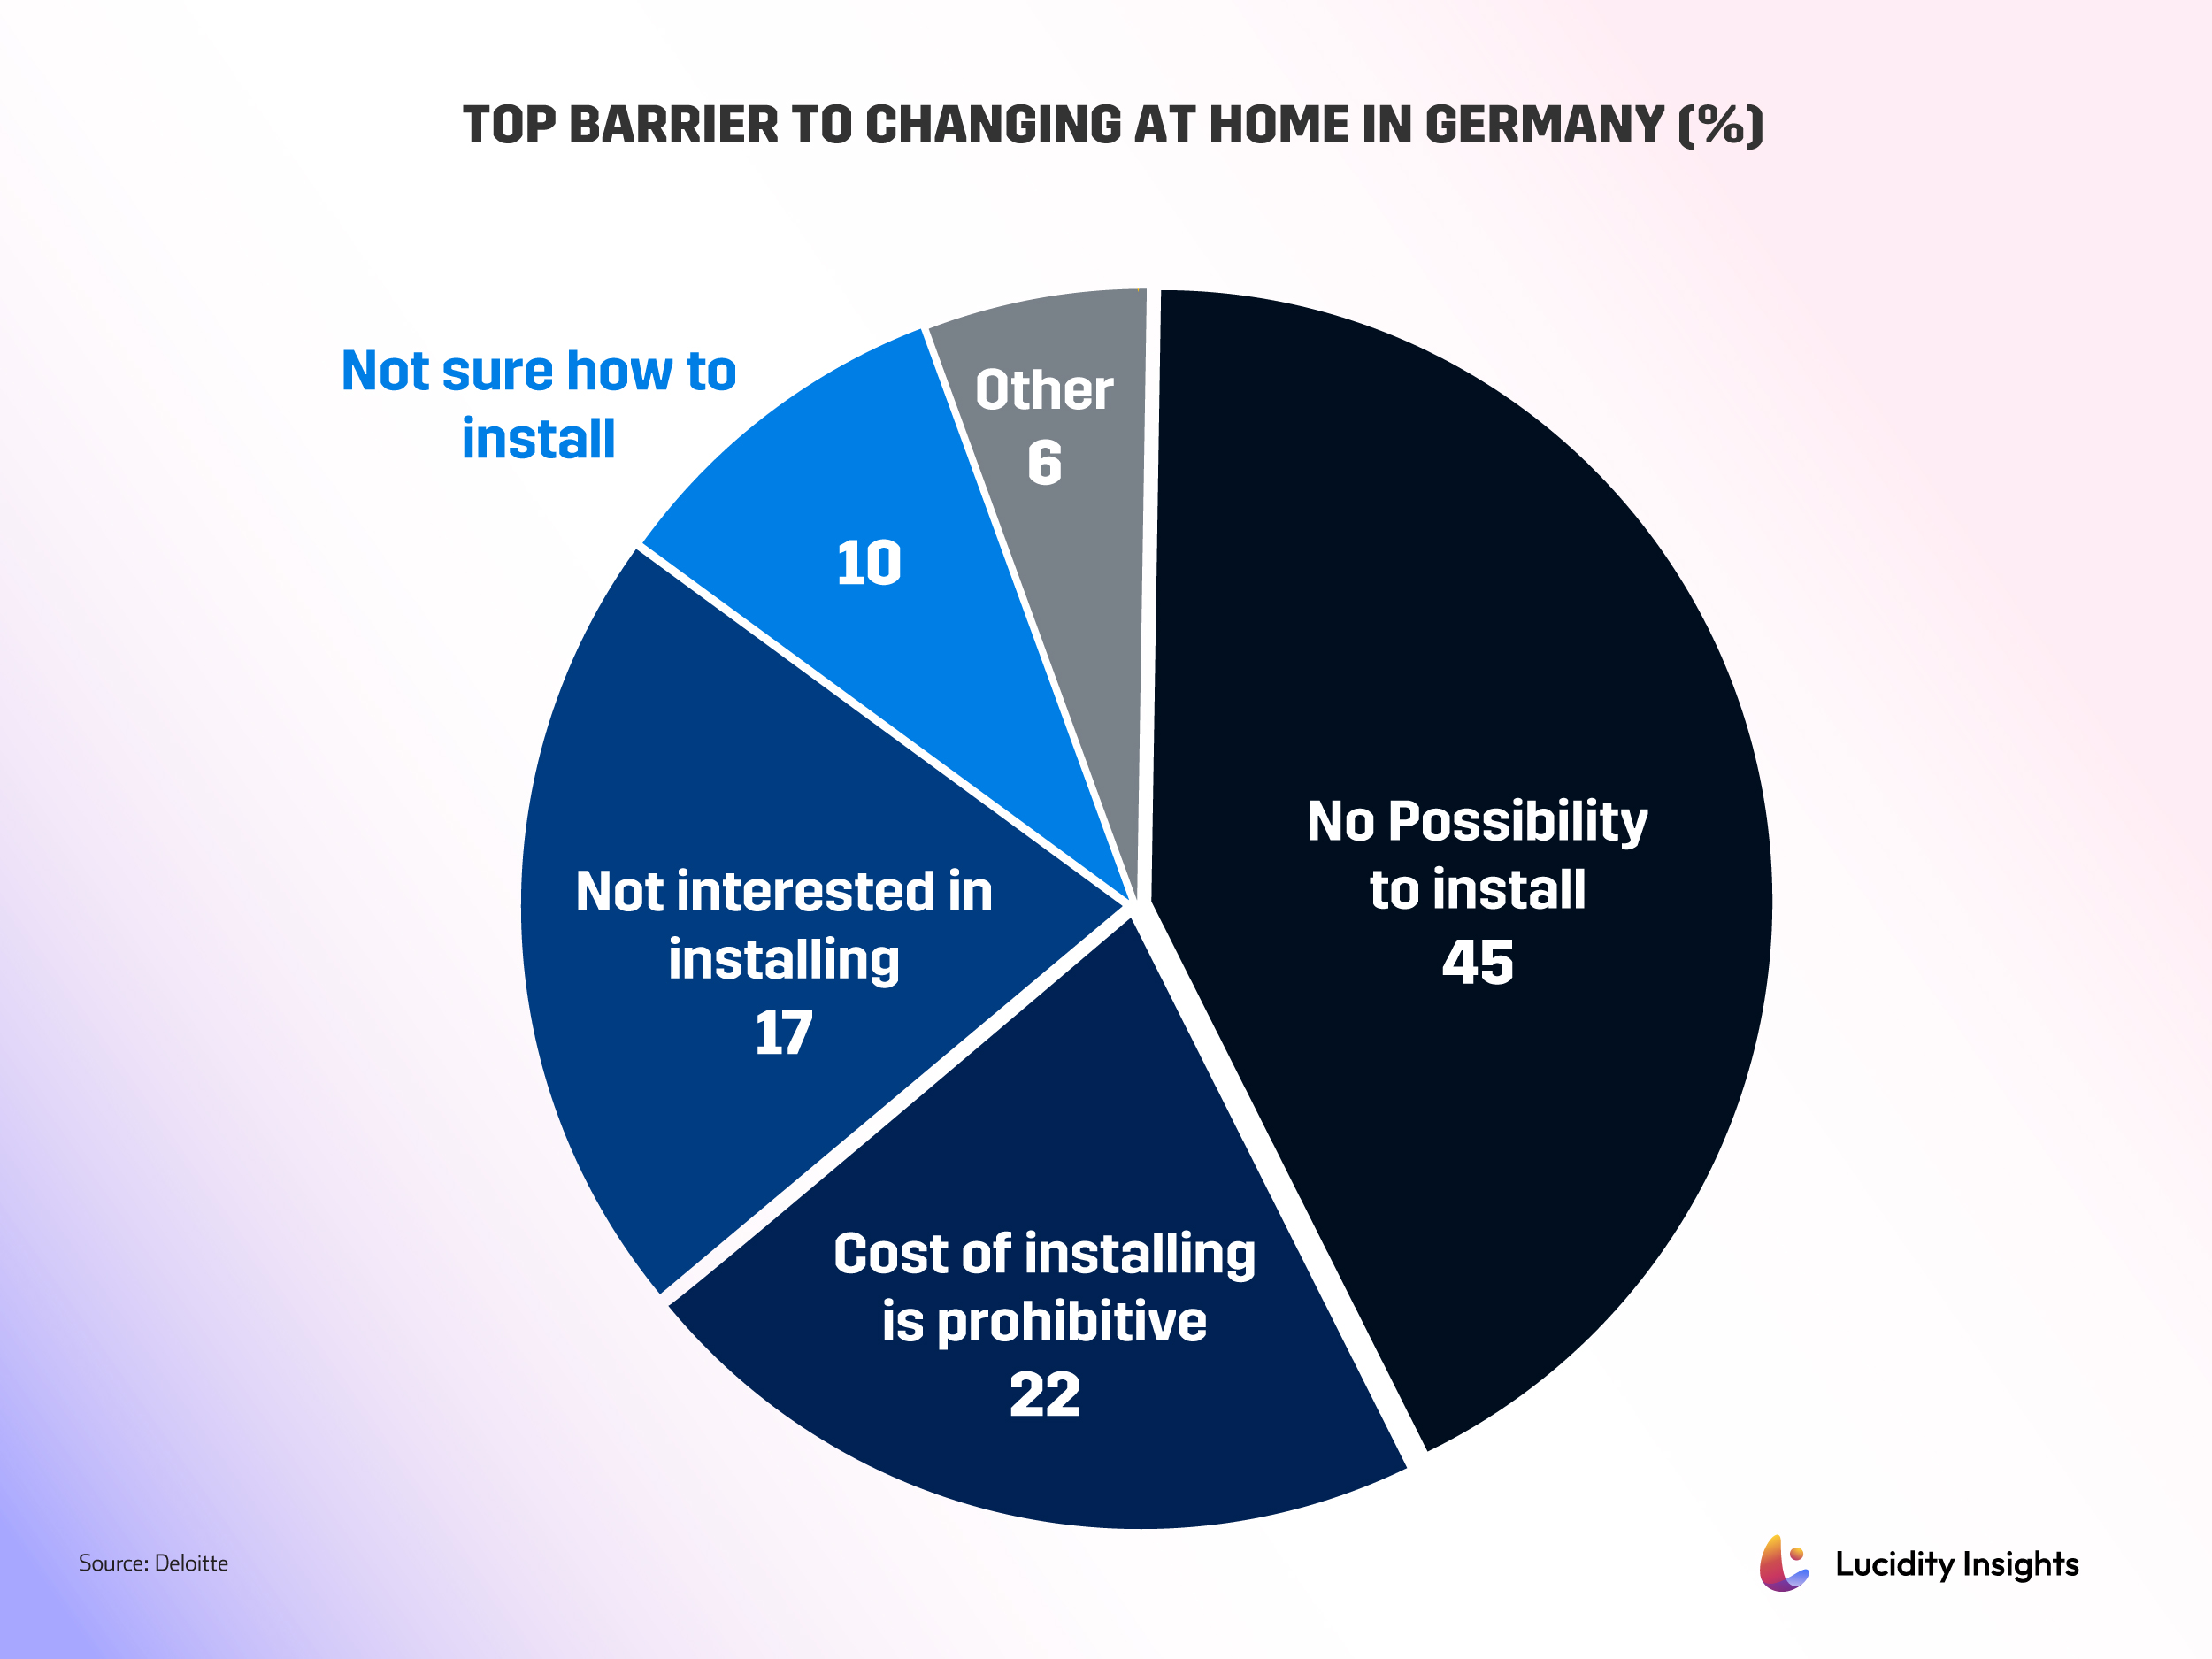 Top Barrier to Changing at Home in Germany